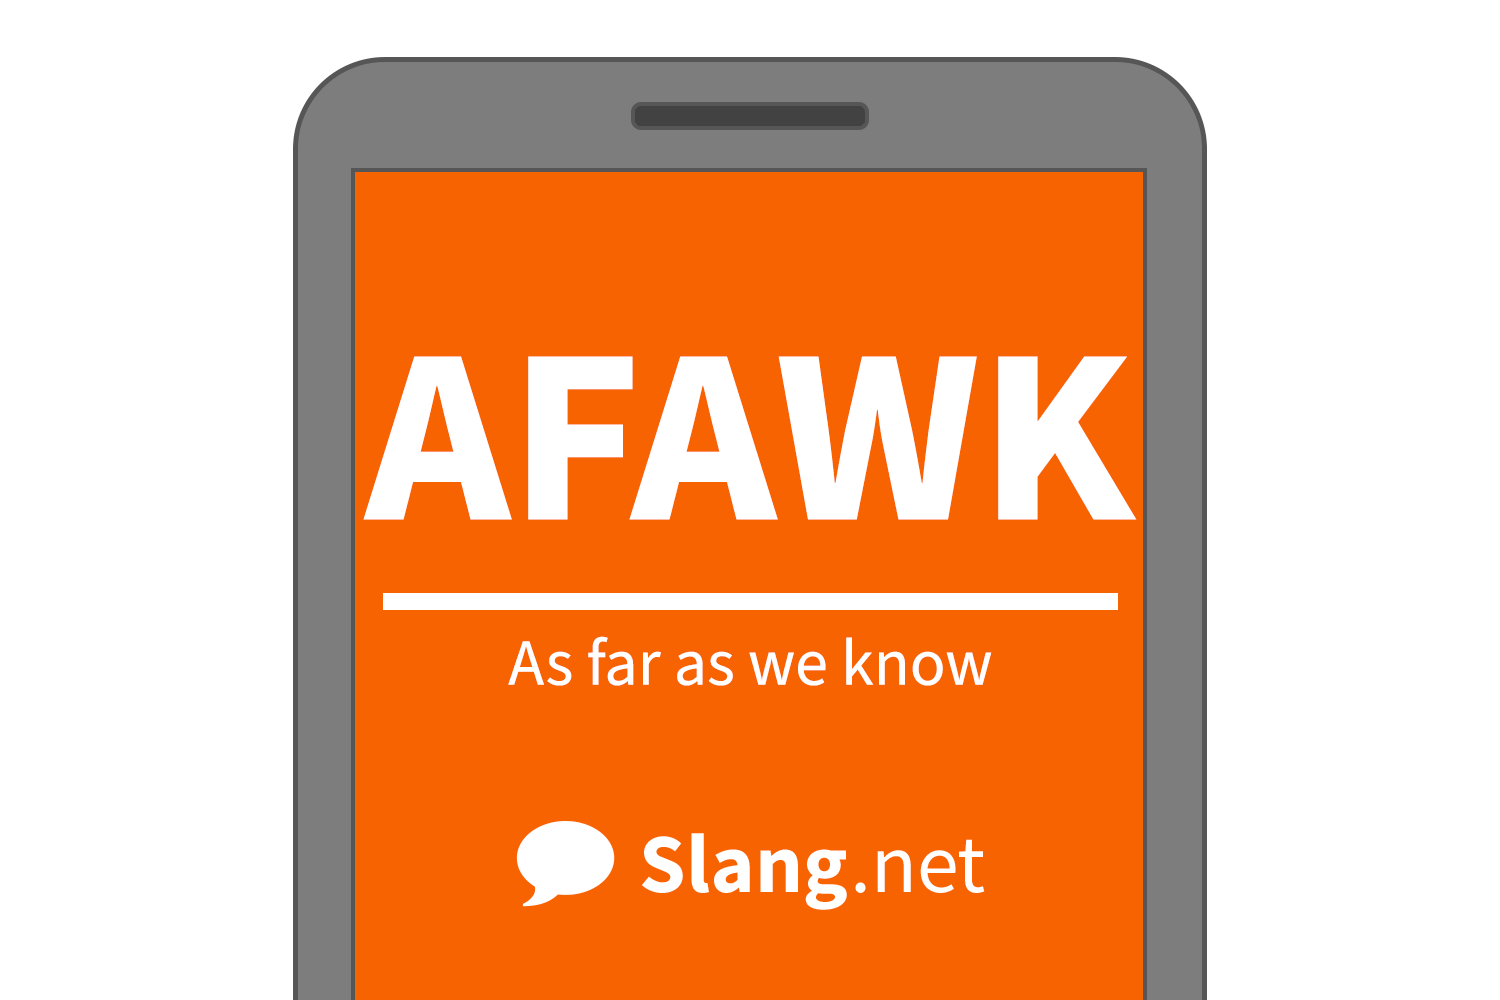 AFAWK stands for &quot;as far as we know&quot;